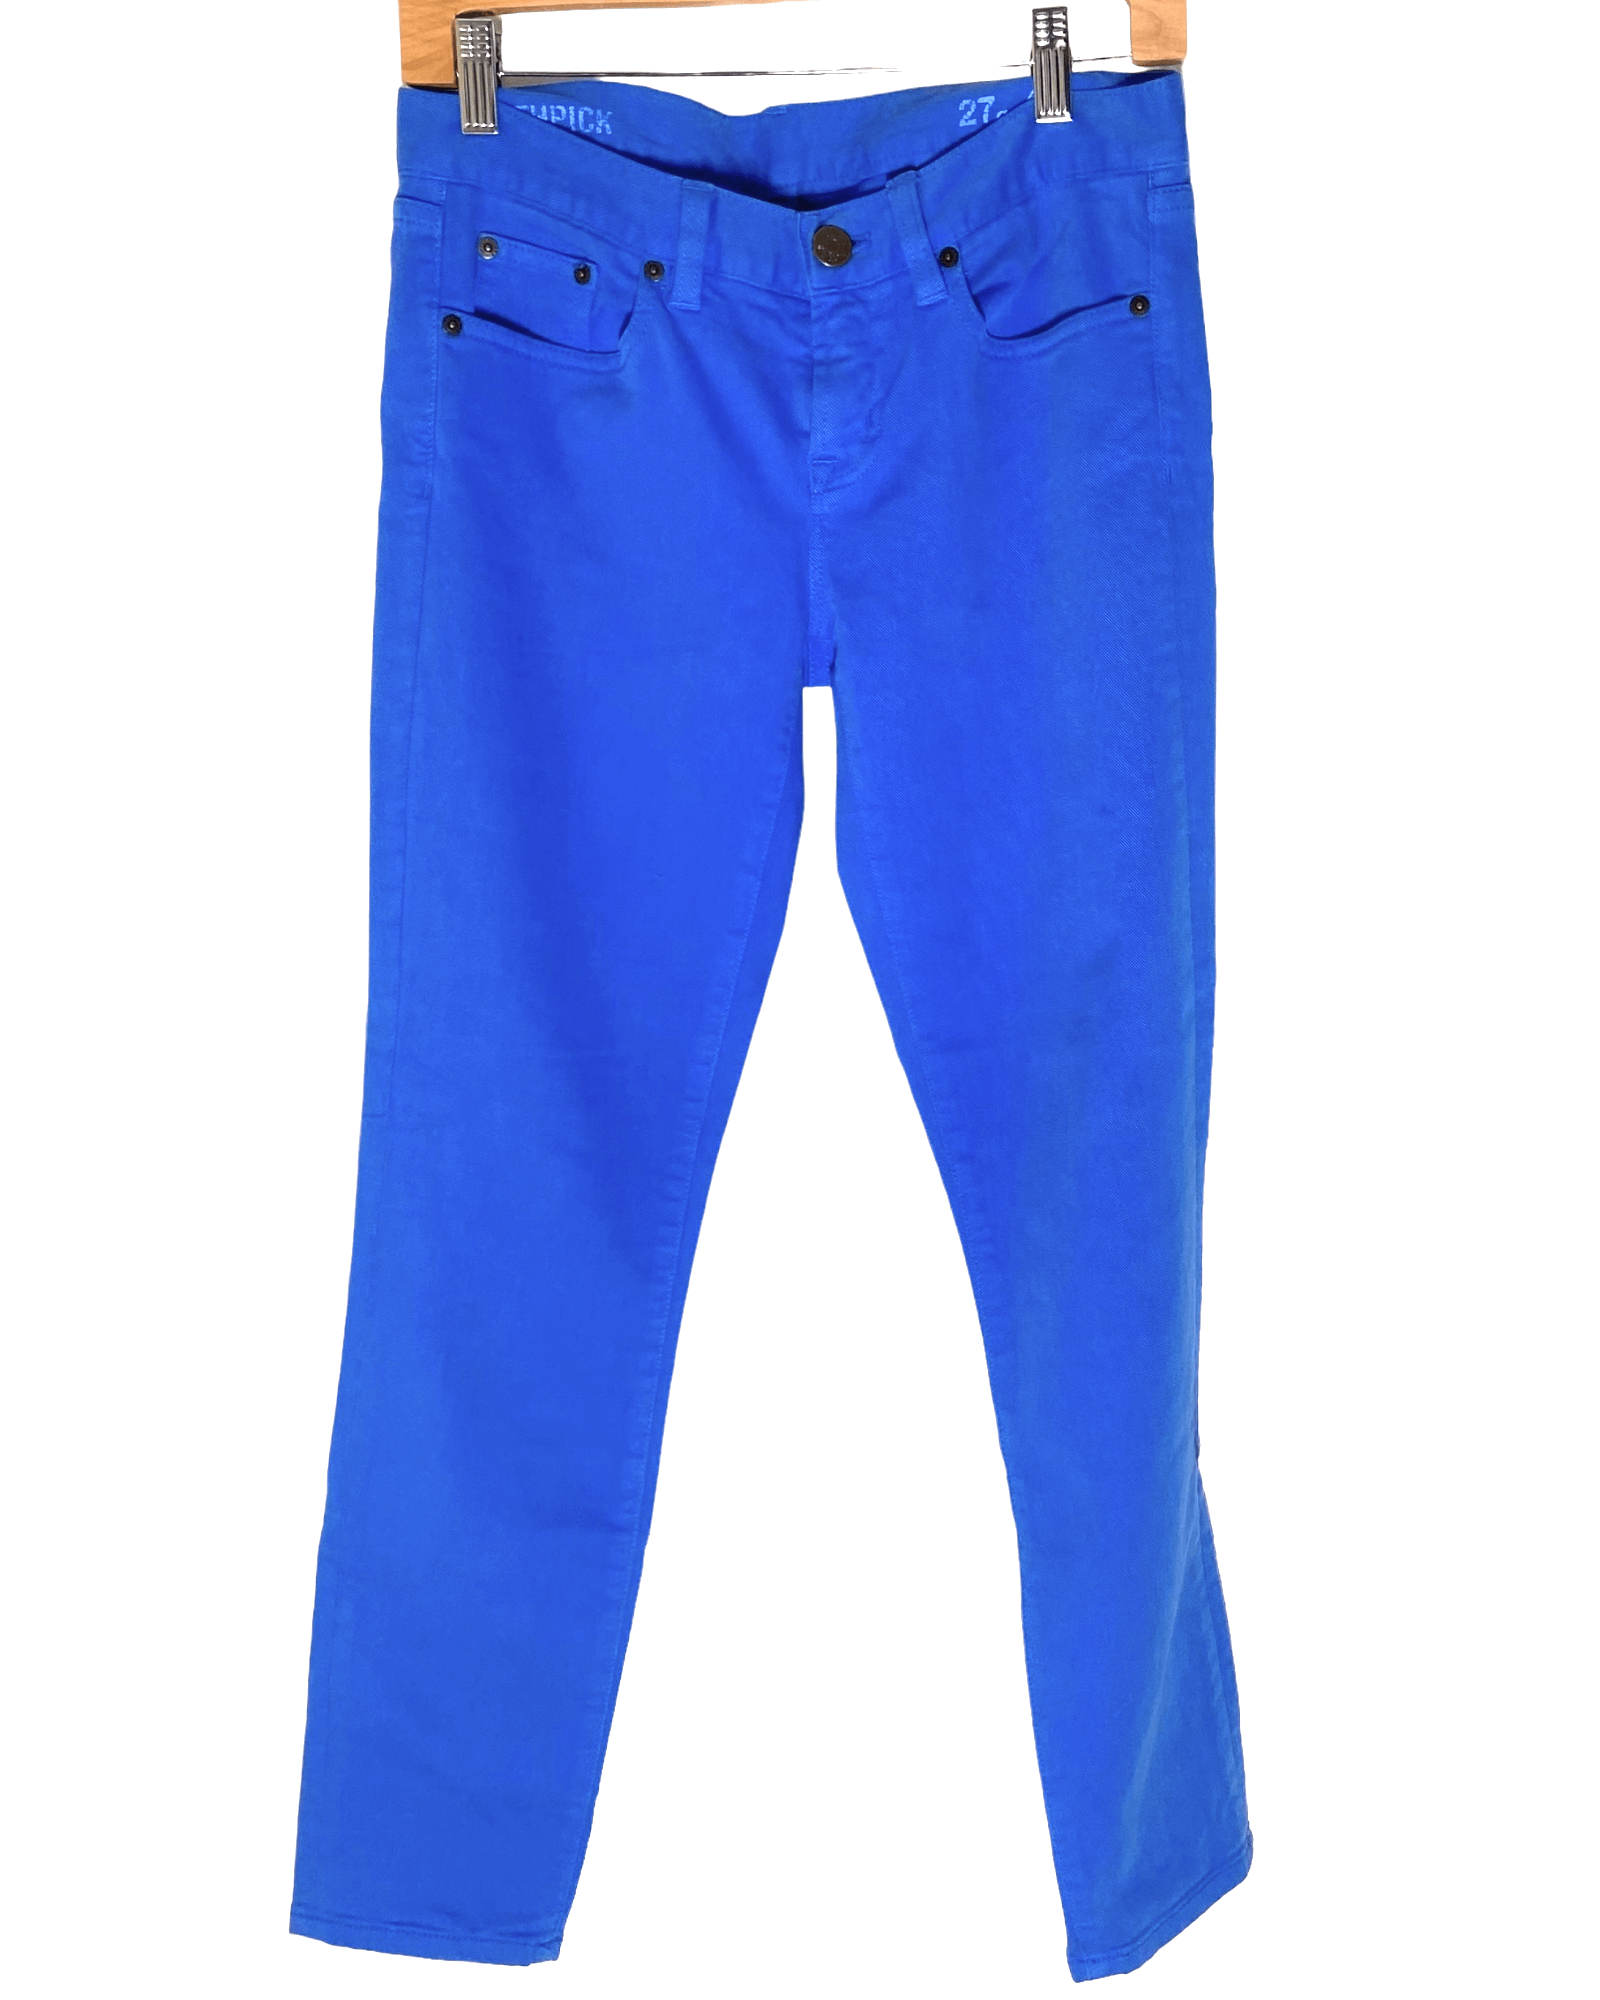 Bright Spring J.CREW azure blue toothpick ankle jeans